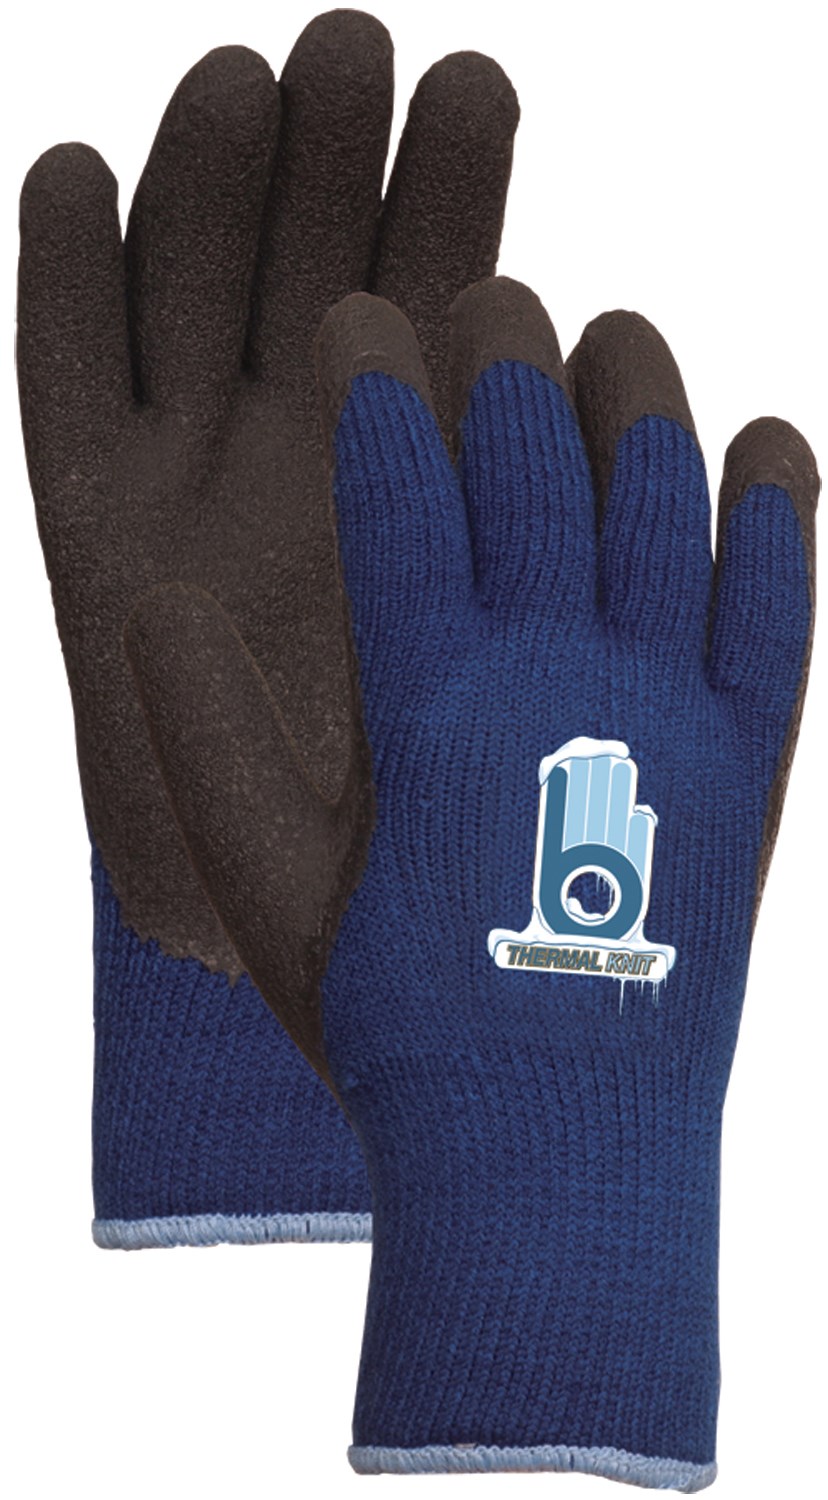 Bellingham Glove C4005s Small Blue Thermal Knit Gloves With Rubber Palm - image 2 of 2